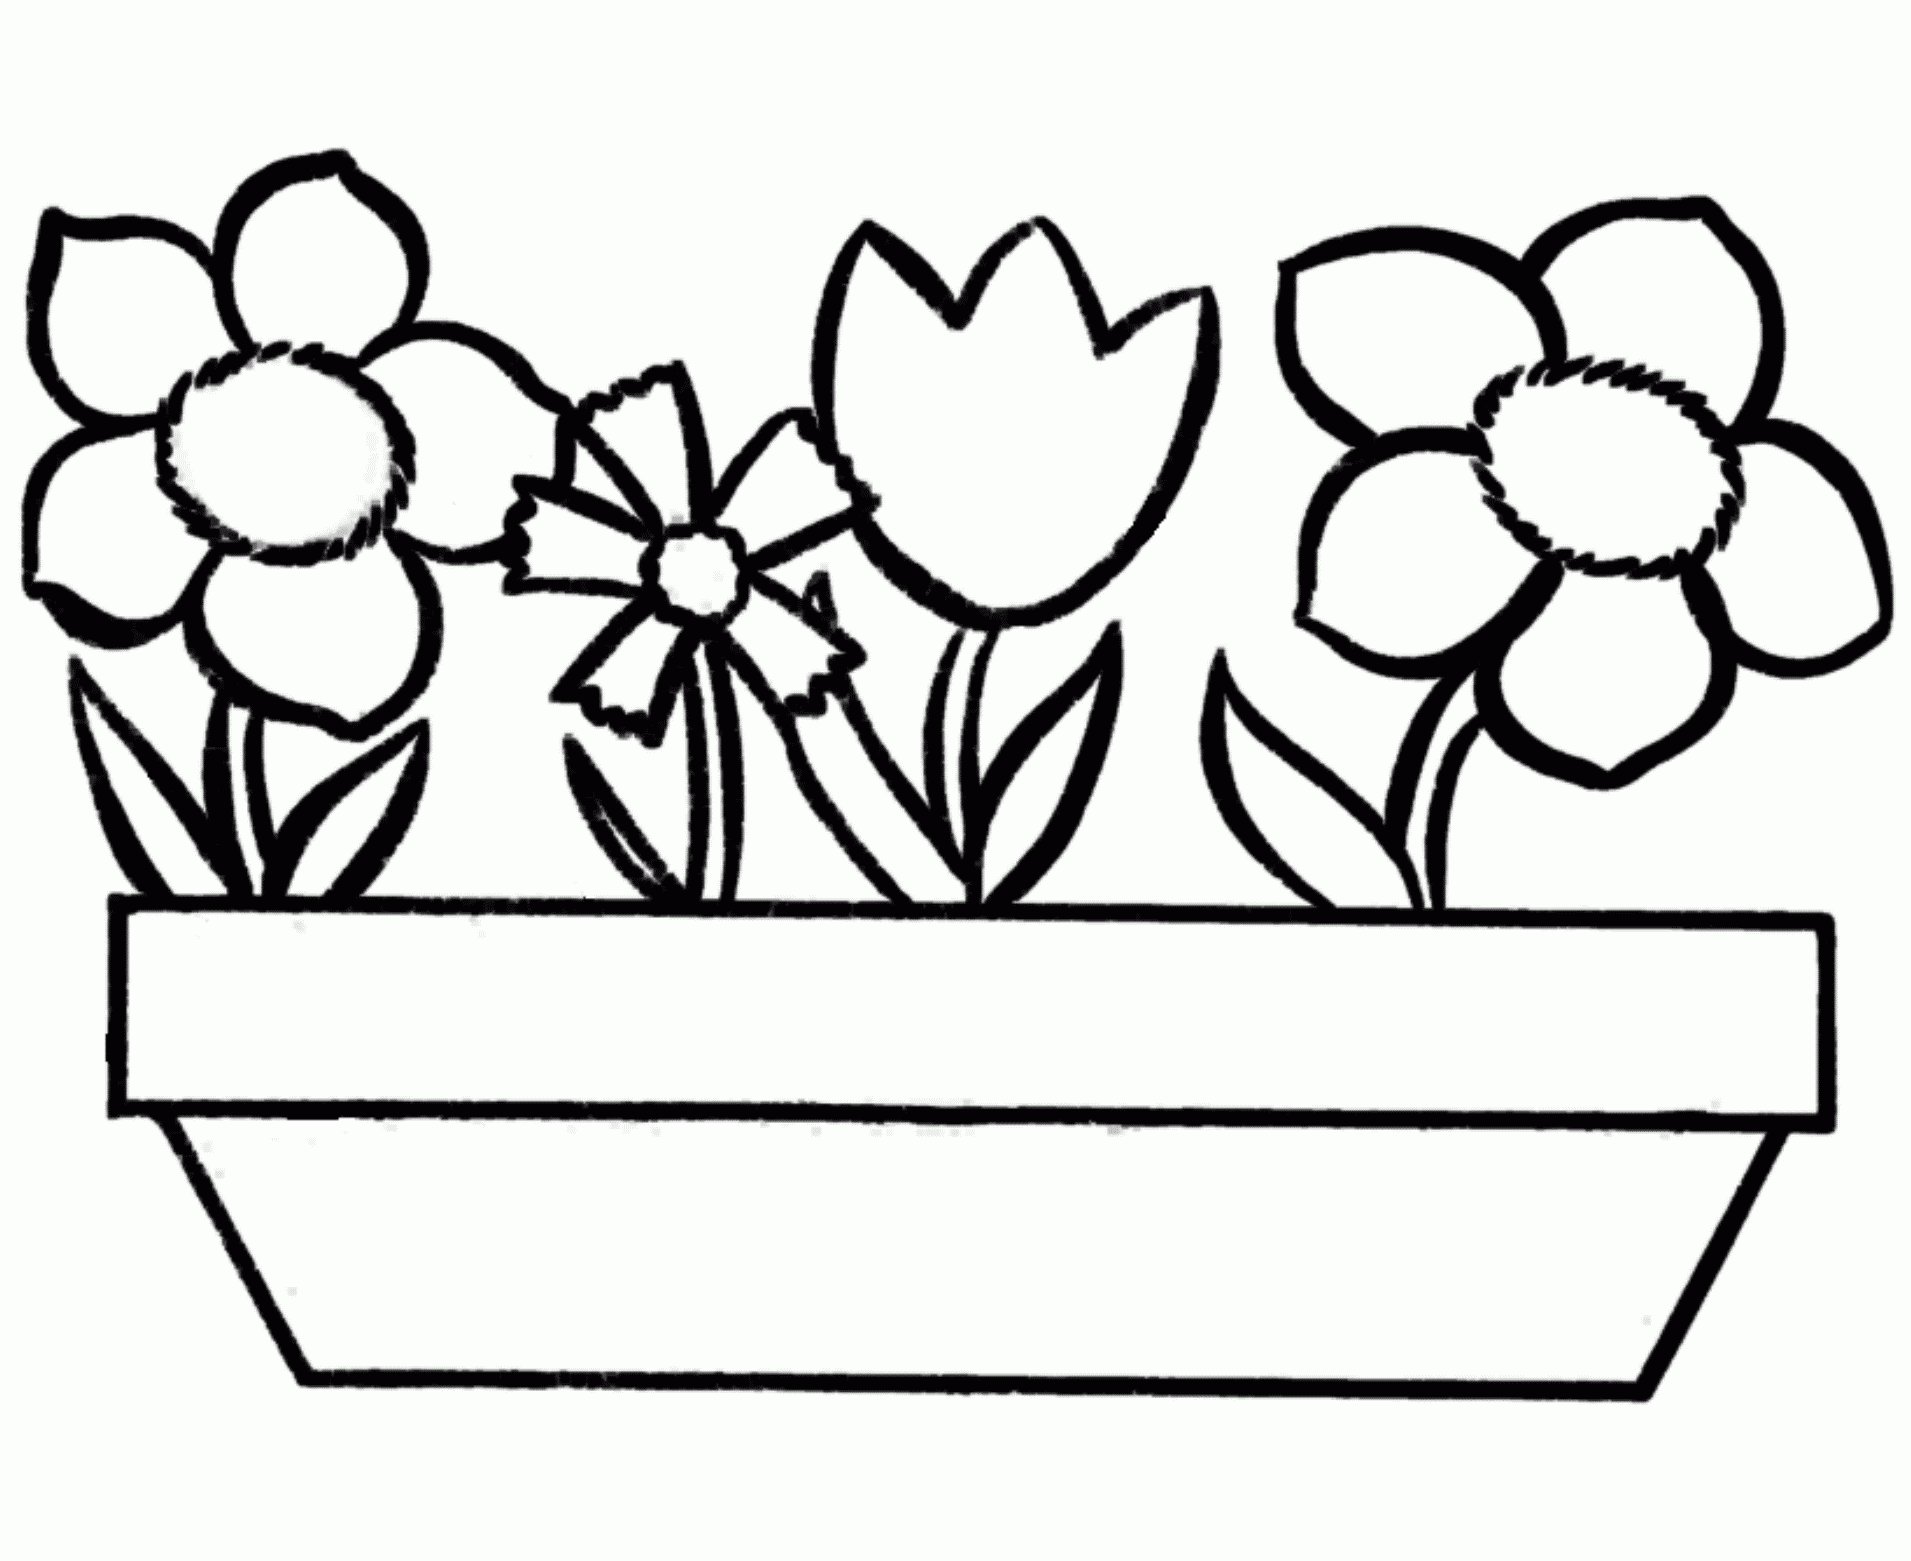 Coloring pages marvelous spring flower coloring pages flowers for kids